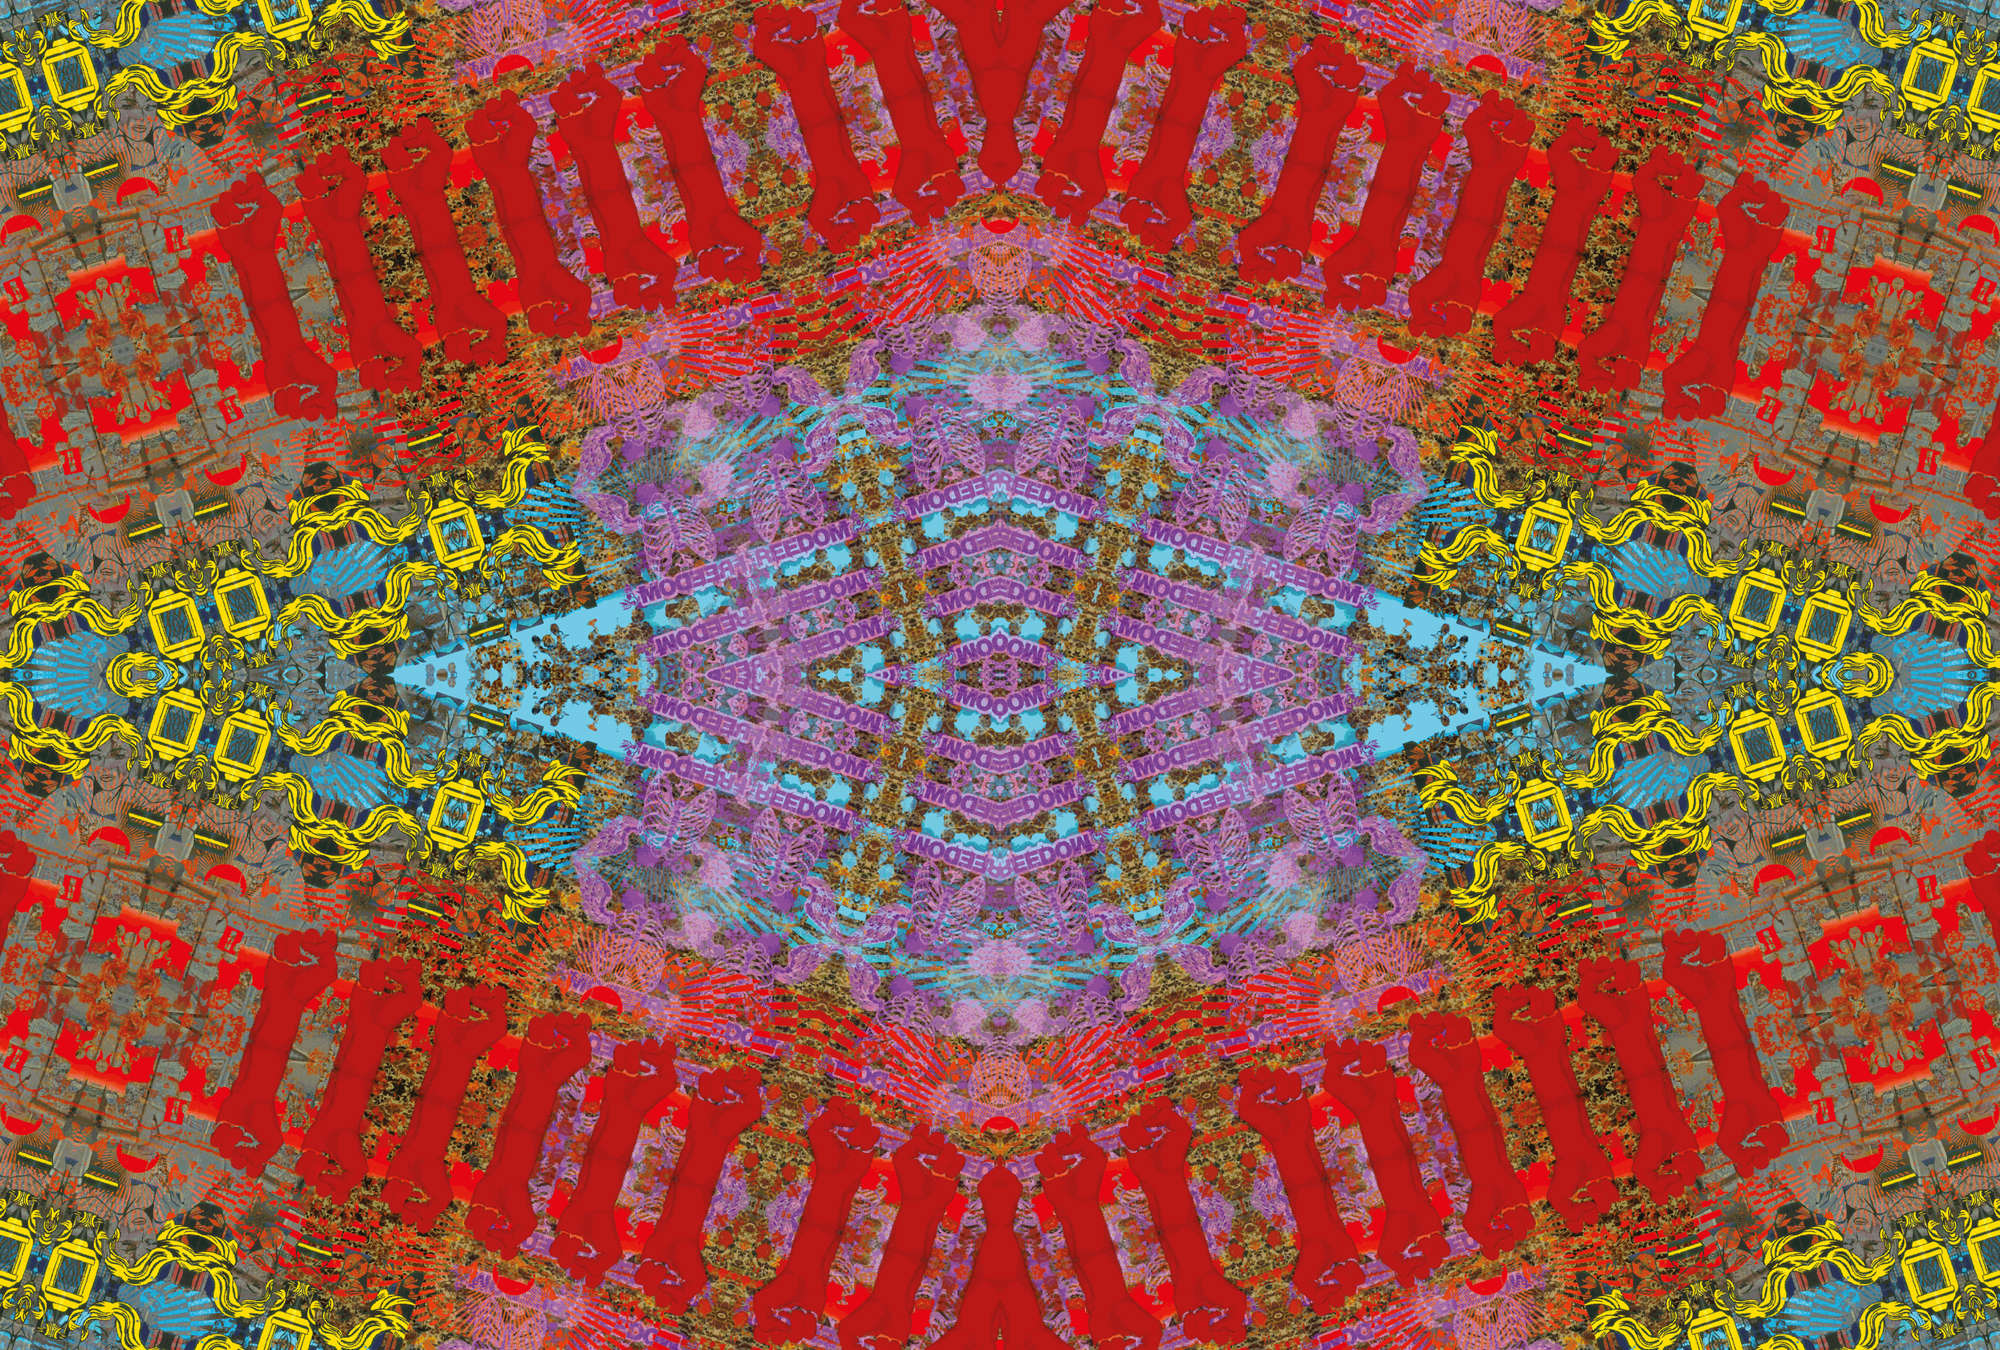             Photo wallpaper with kaleidoscope effect & intense colours
        